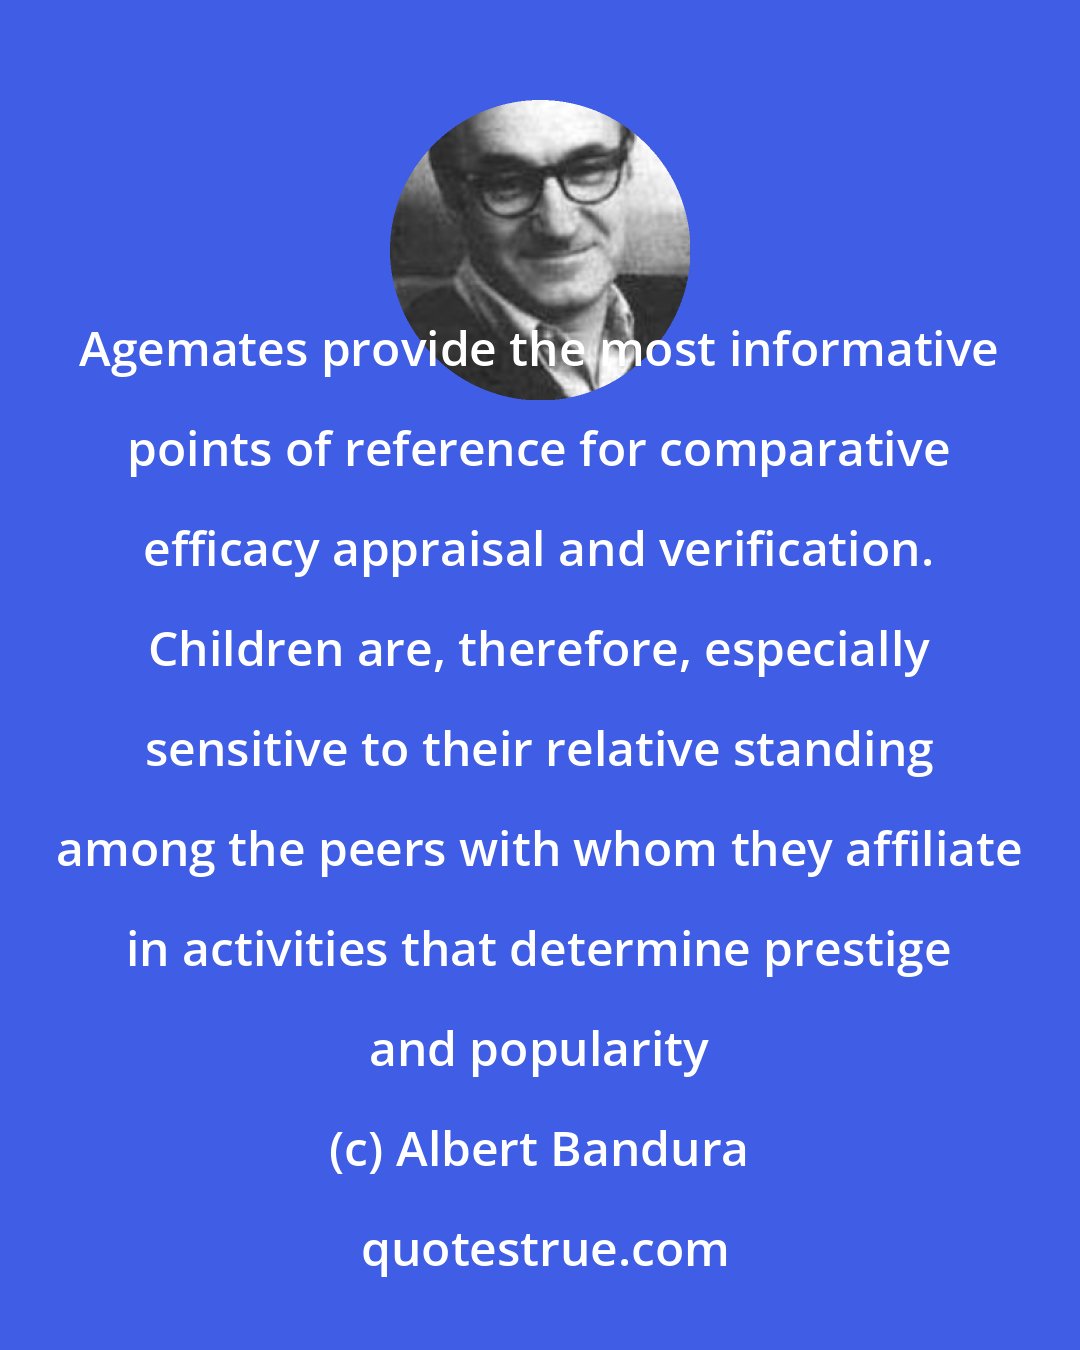 Albert Bandura: Agemates provide the most informative points of reference for comparative efficacy appraisal and verification. Children are, therefore, especially sensitive to their relative standing among the peers with whom they affiliate in activities that determine prestige and popularity